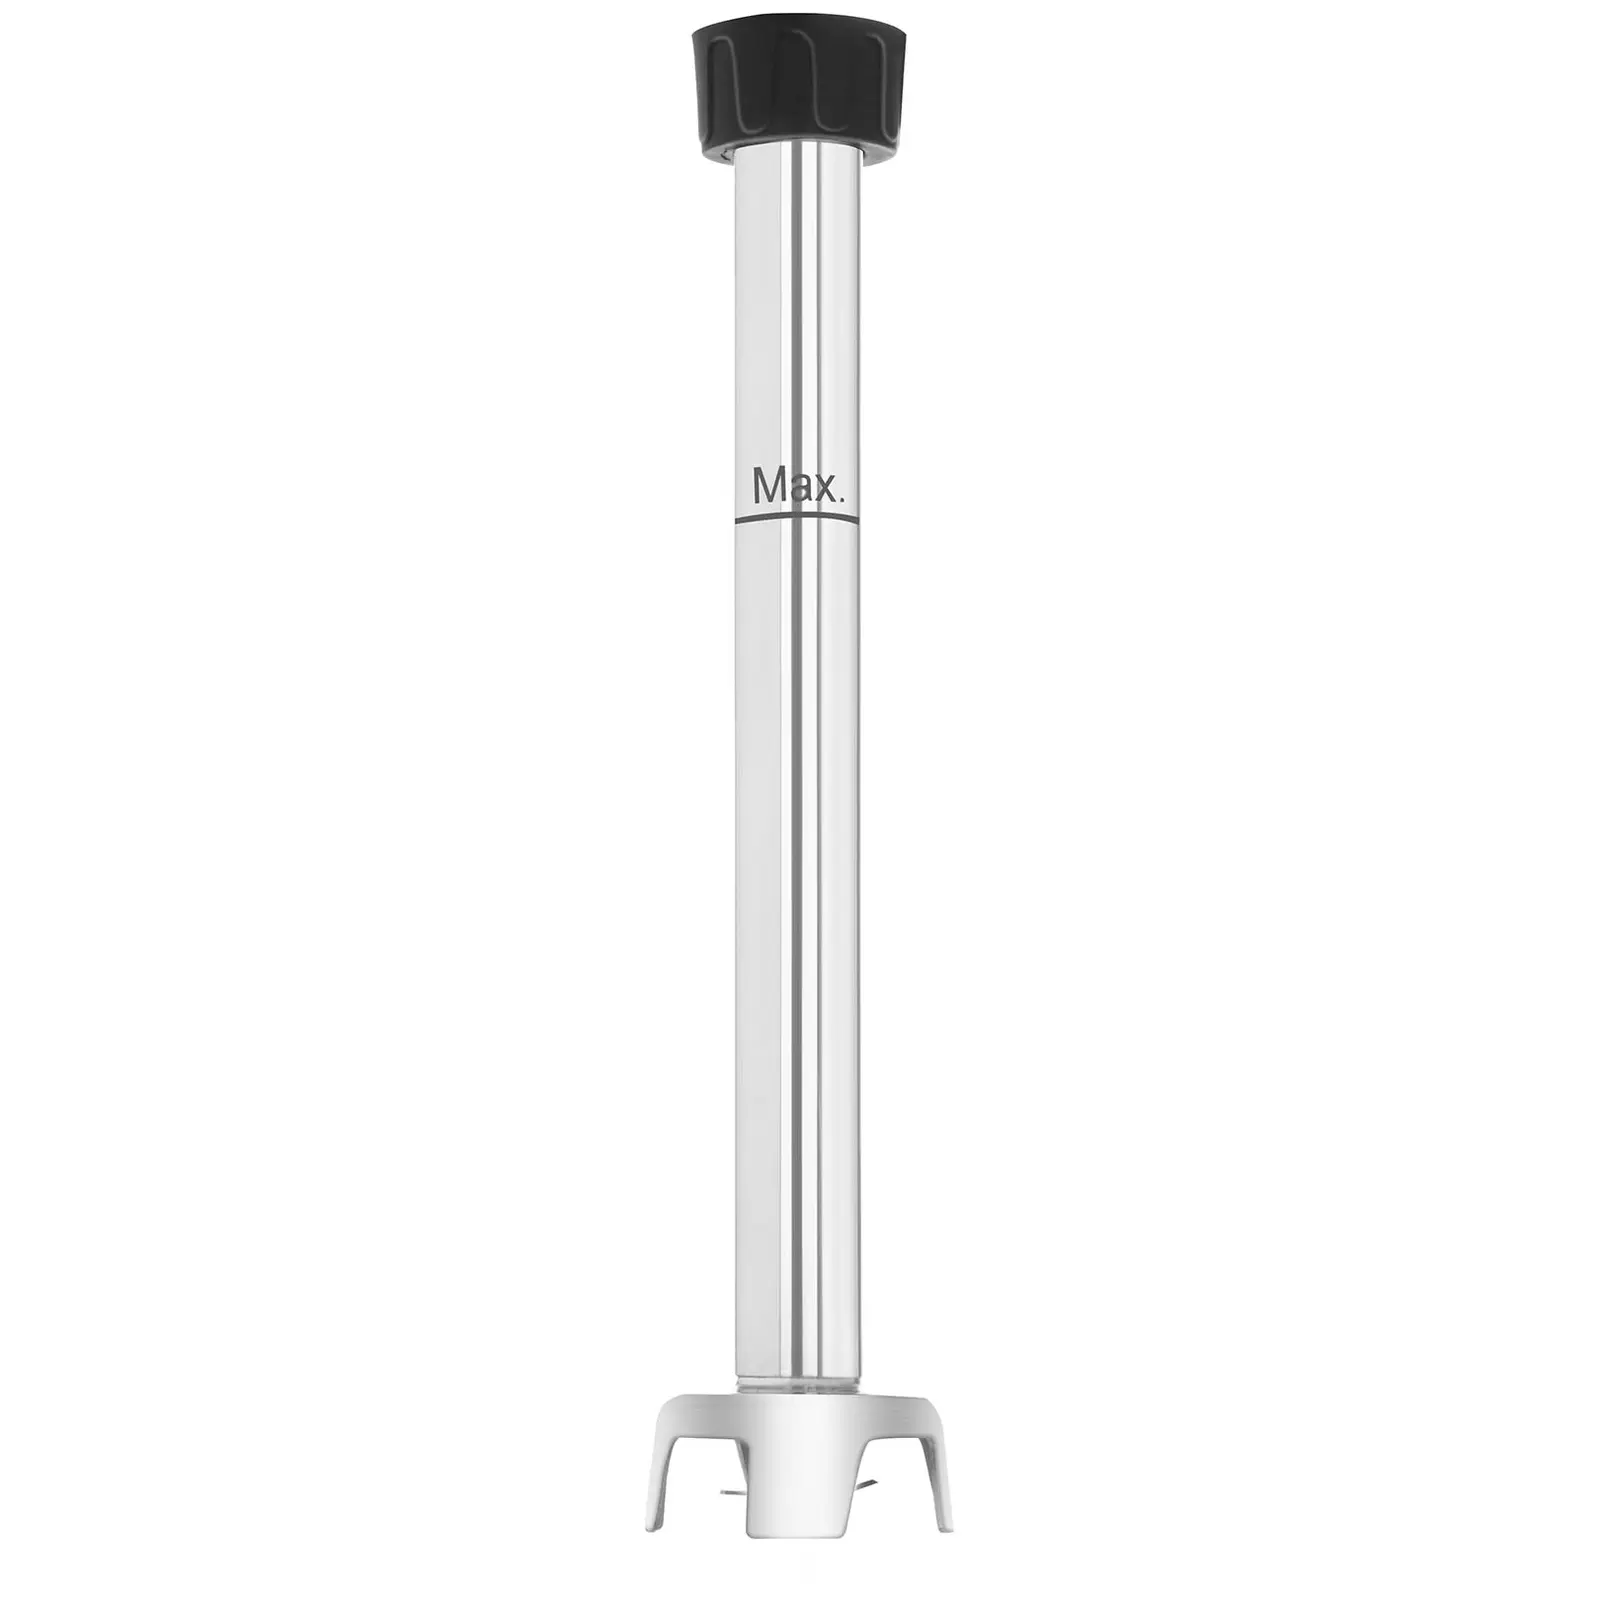 Hand blender - 350 W - 400 mm - 4,000 to 18,000 rpm - 5